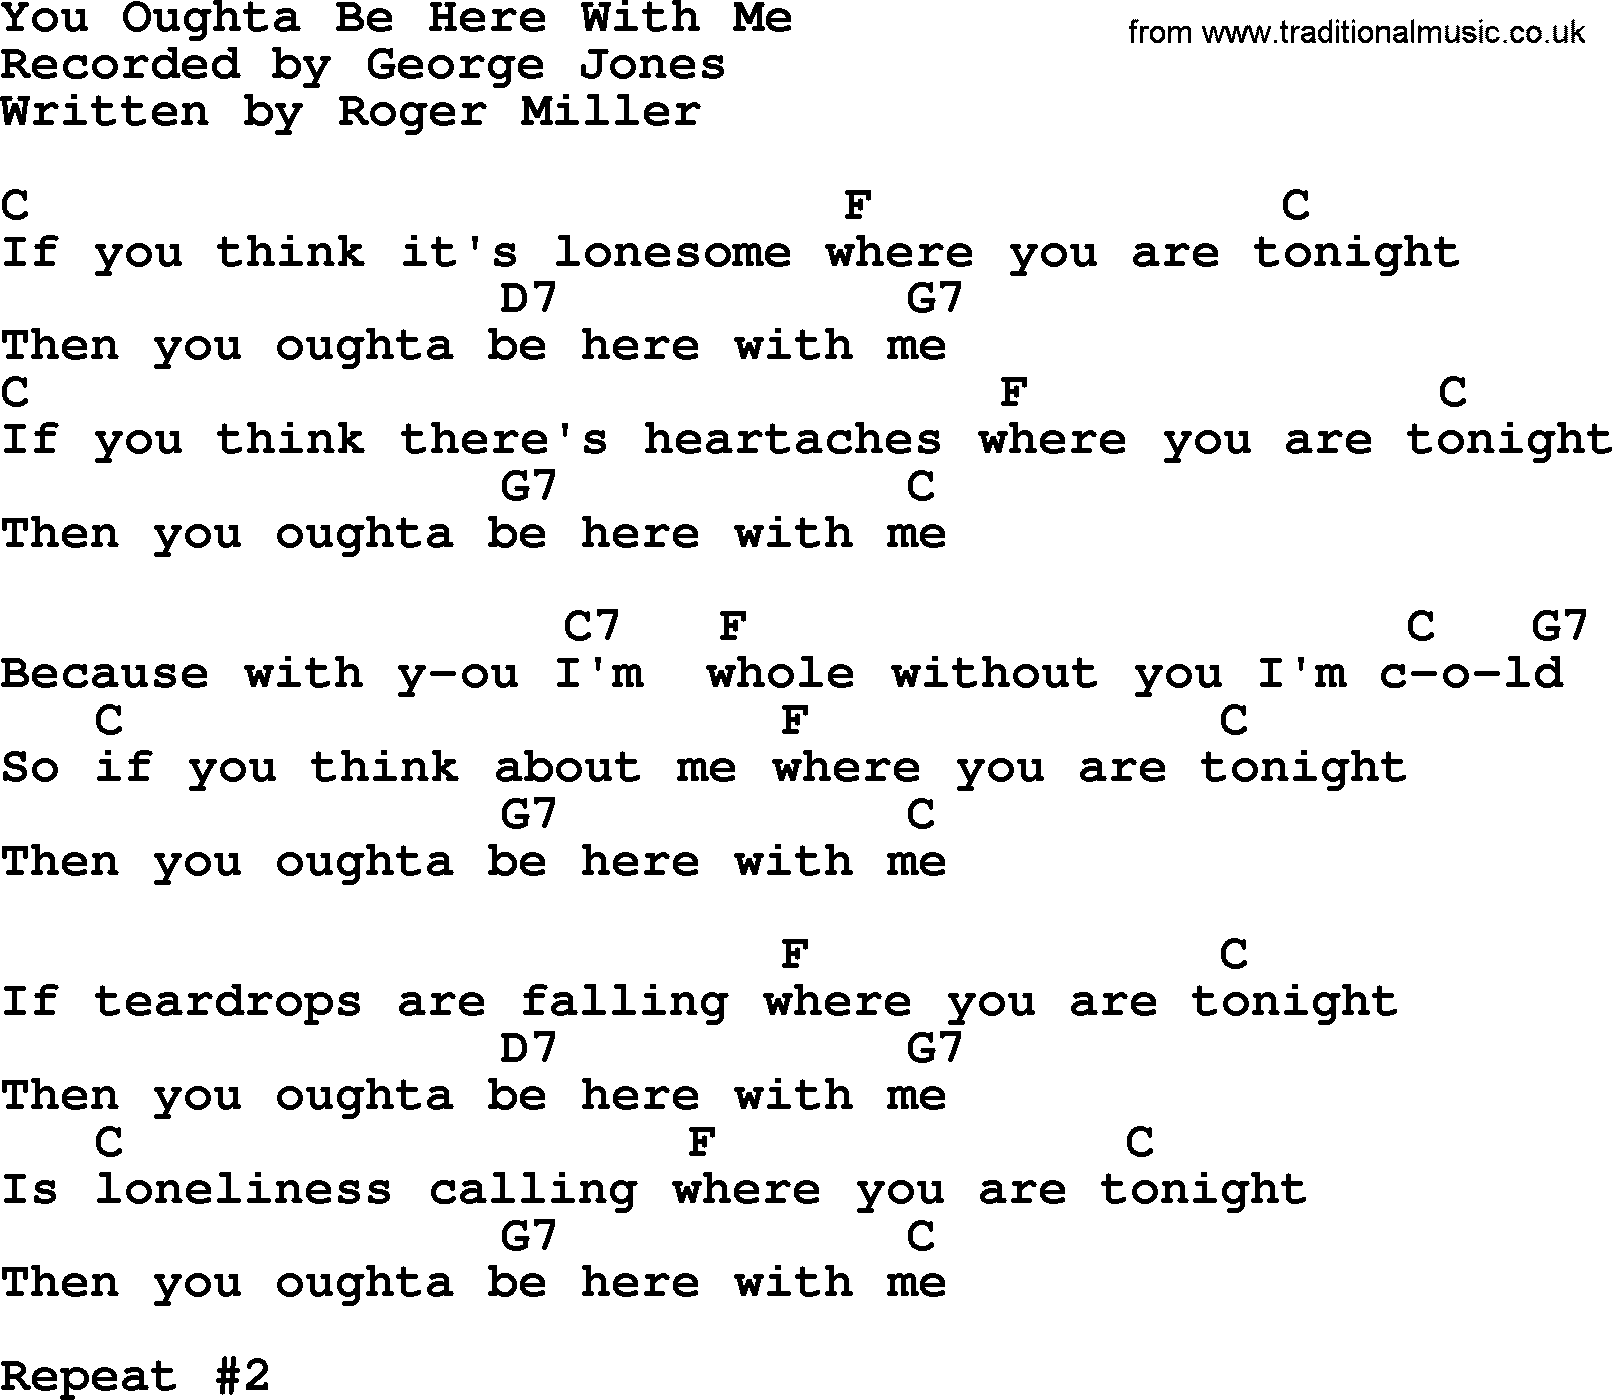 George Jones song: You Oughta Be Here With Me, lyrics and chords